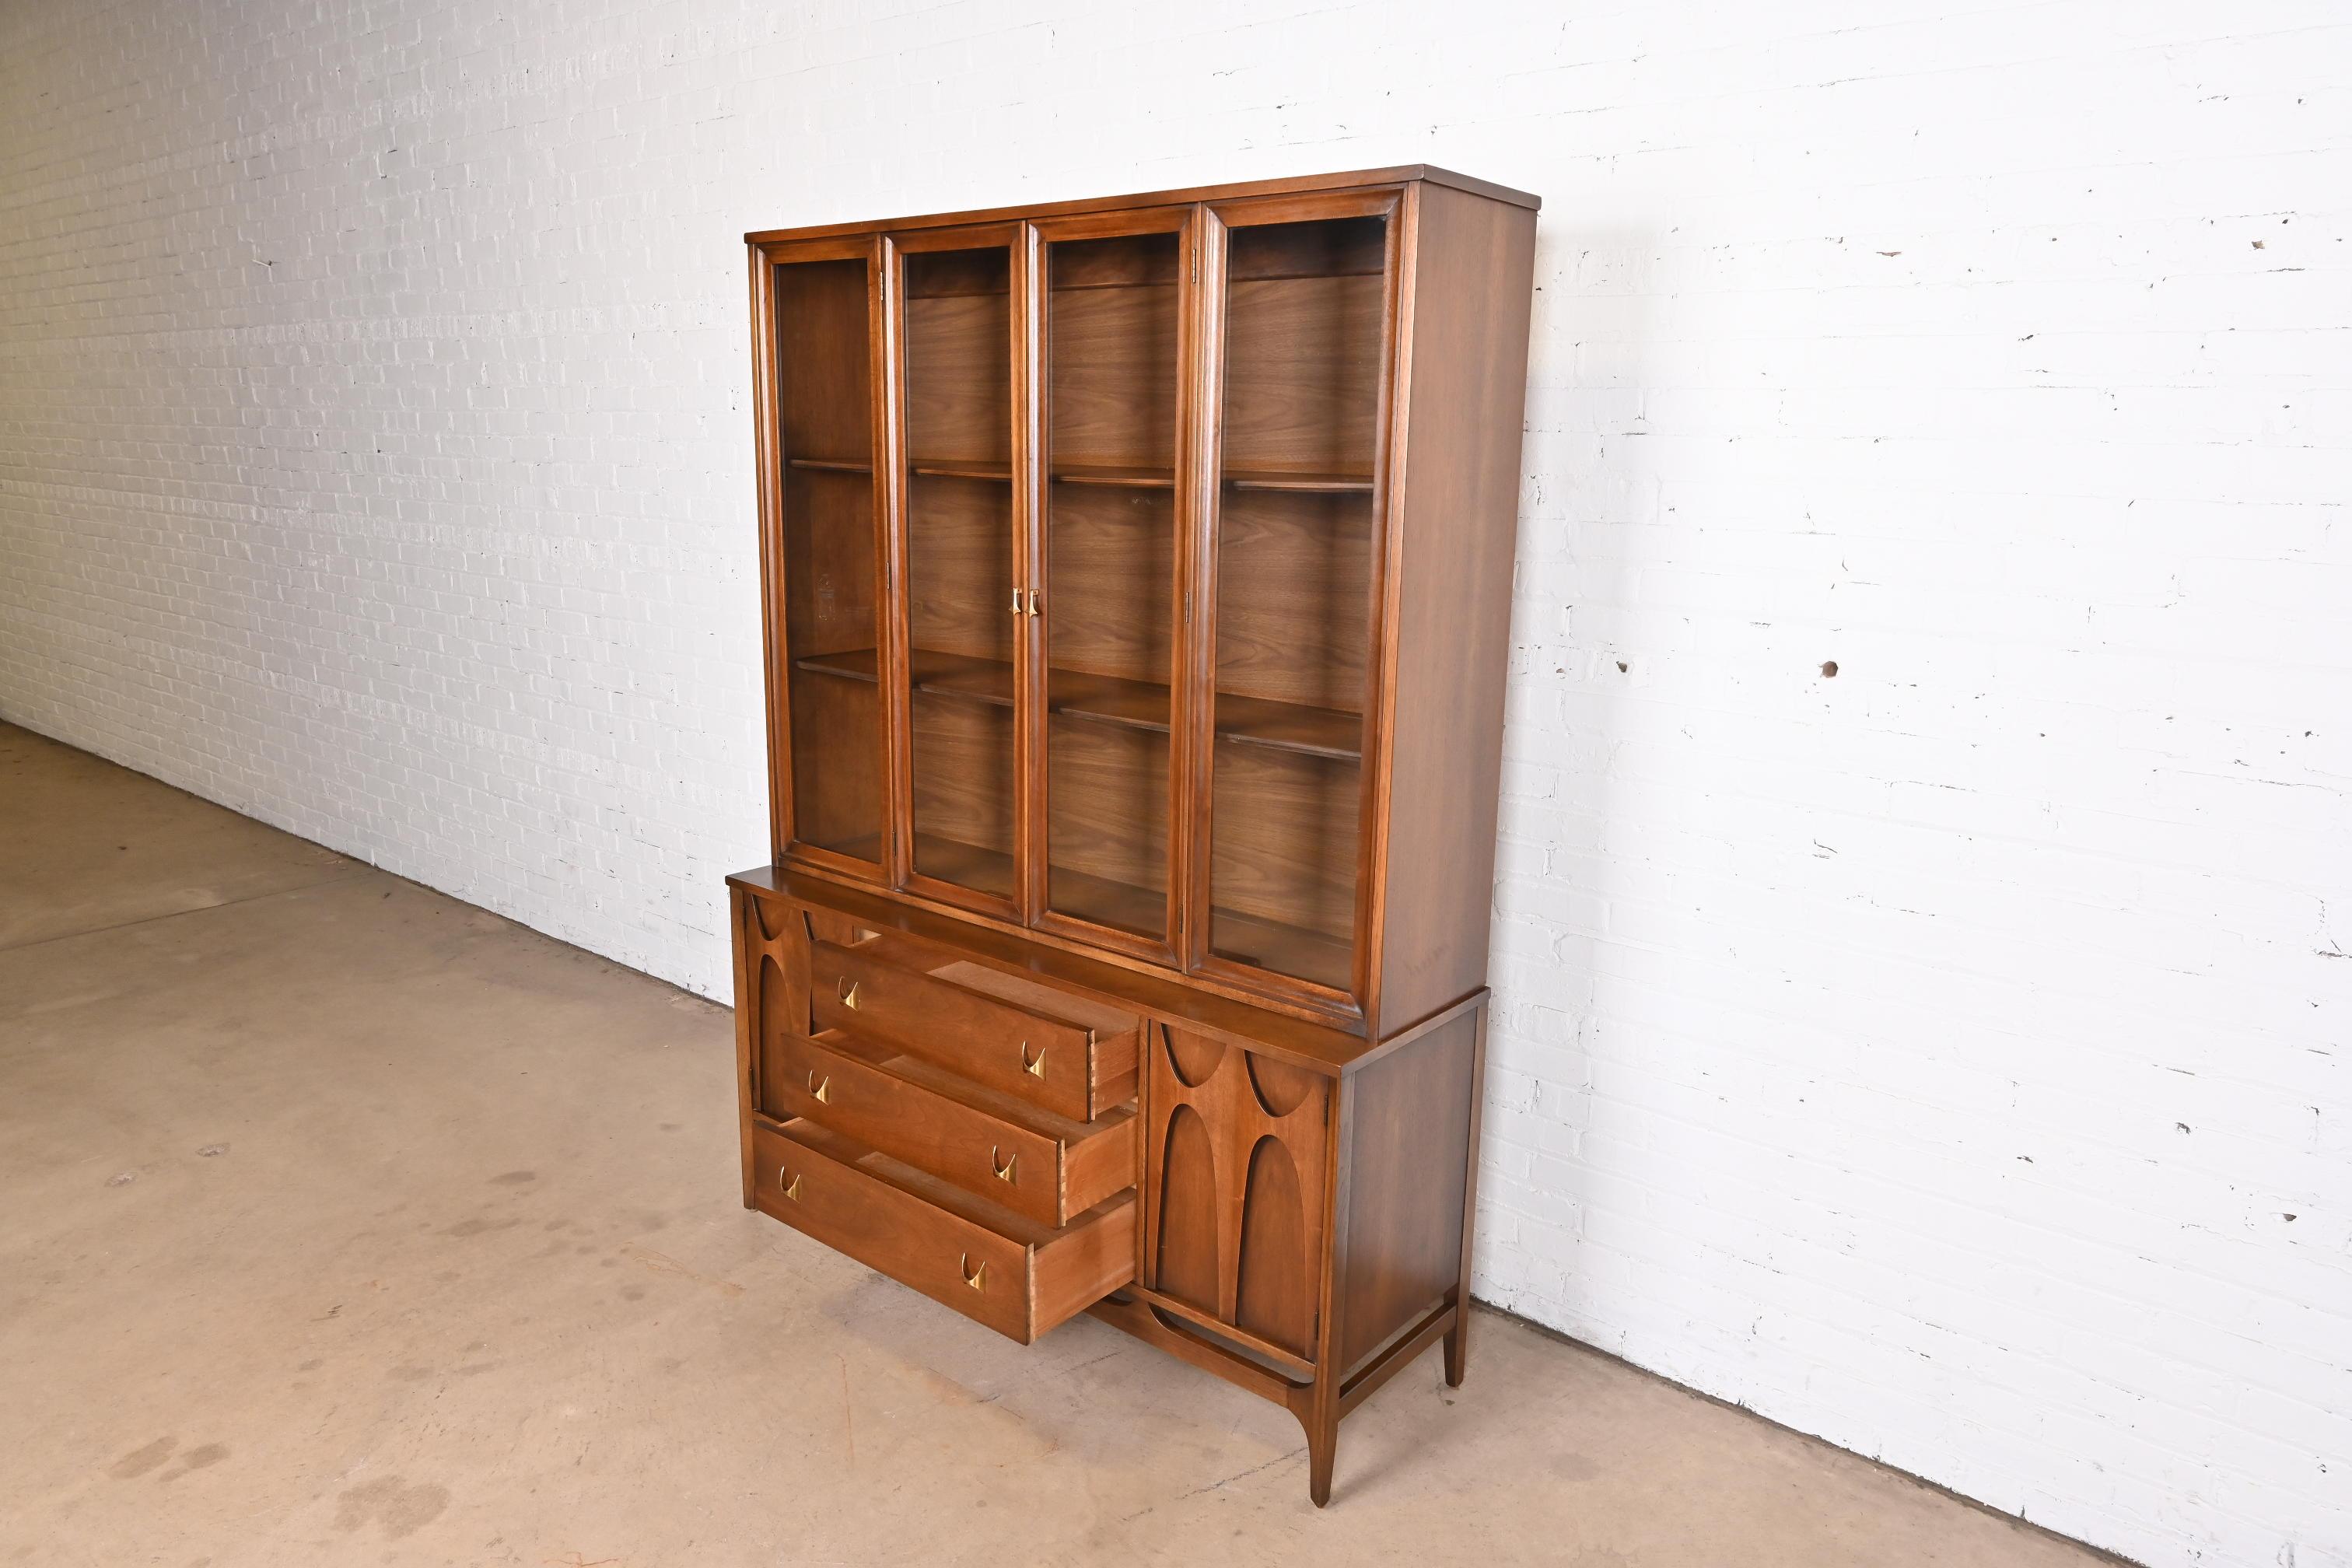 Brass Broyhill Brasilia Sculpted Walnut Breakfront Bookcase or China Cabinet, 1960s